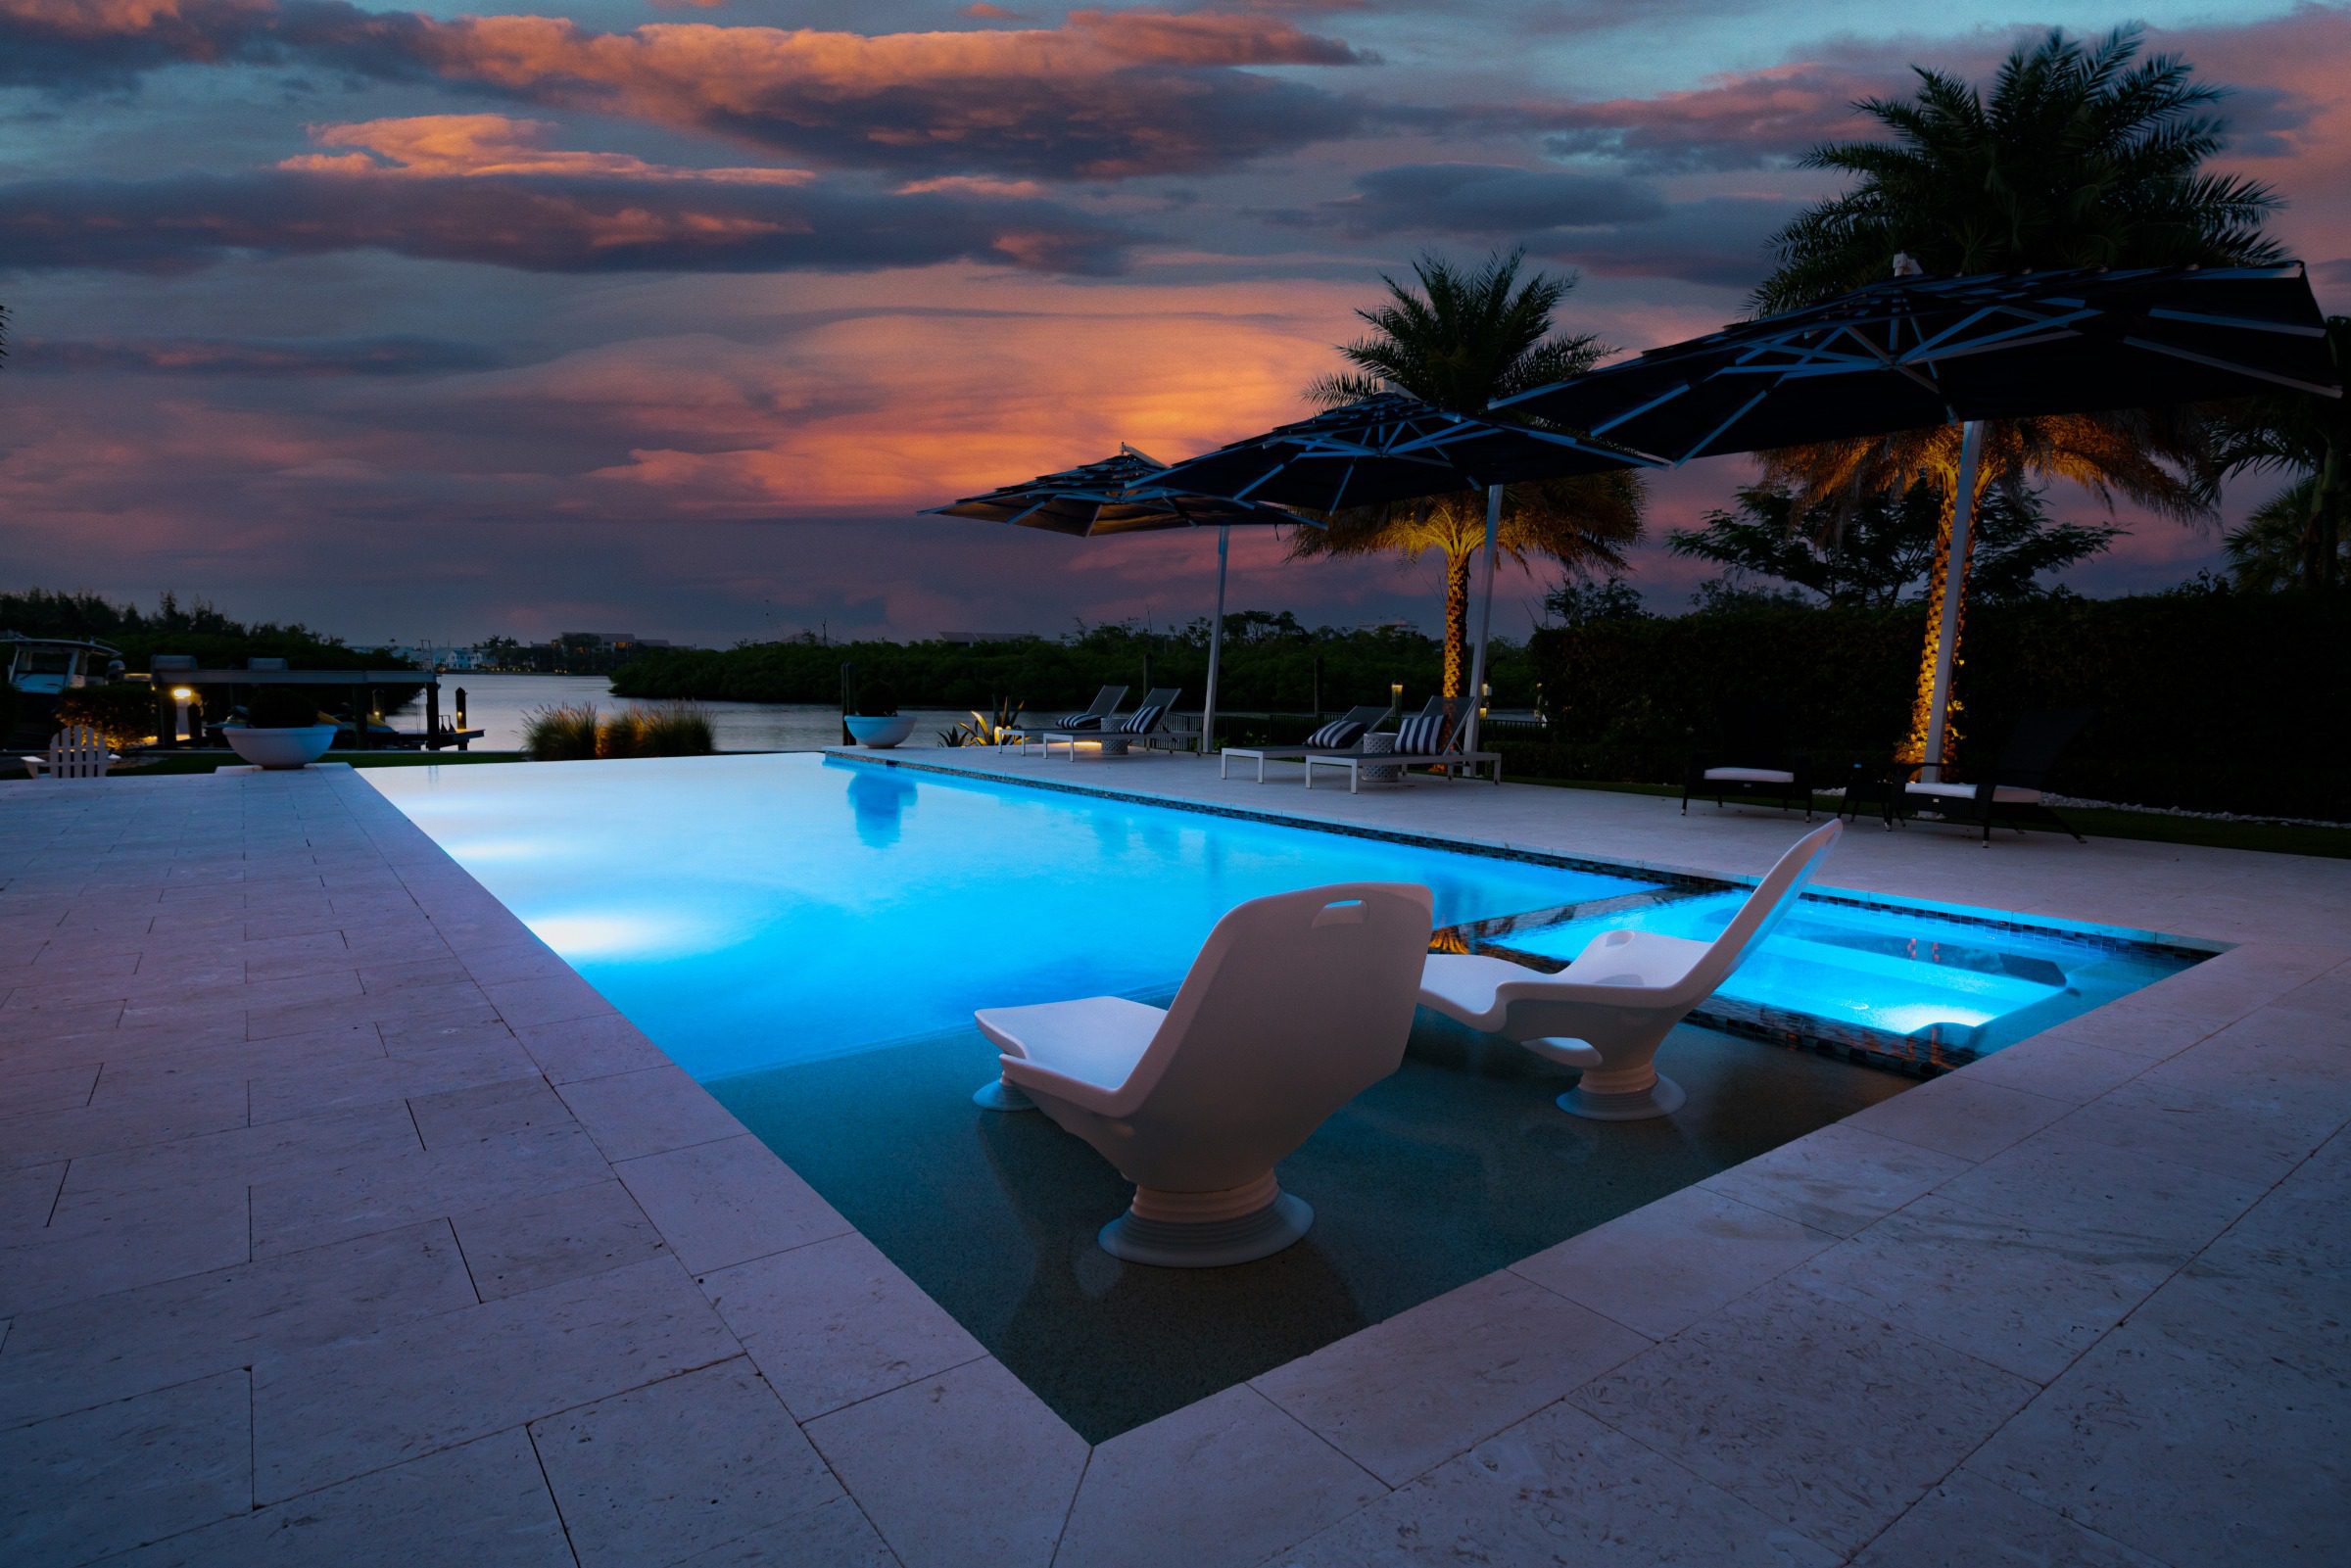 4 Reasons Why Your Swimming Pool Lights Aren't Working